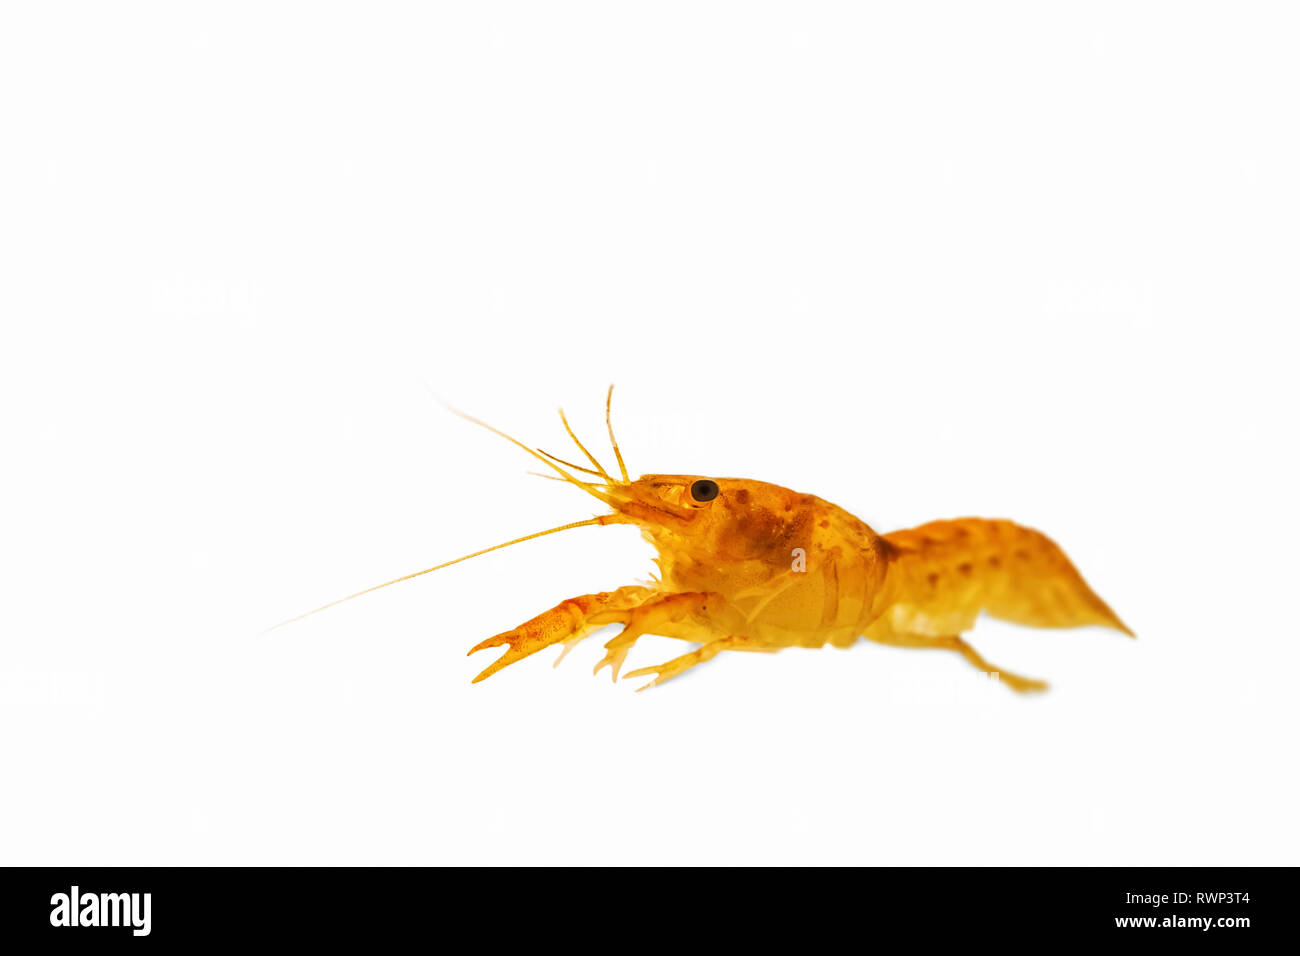 Mexican Dwarf Crayfish on a white background Stock Photo